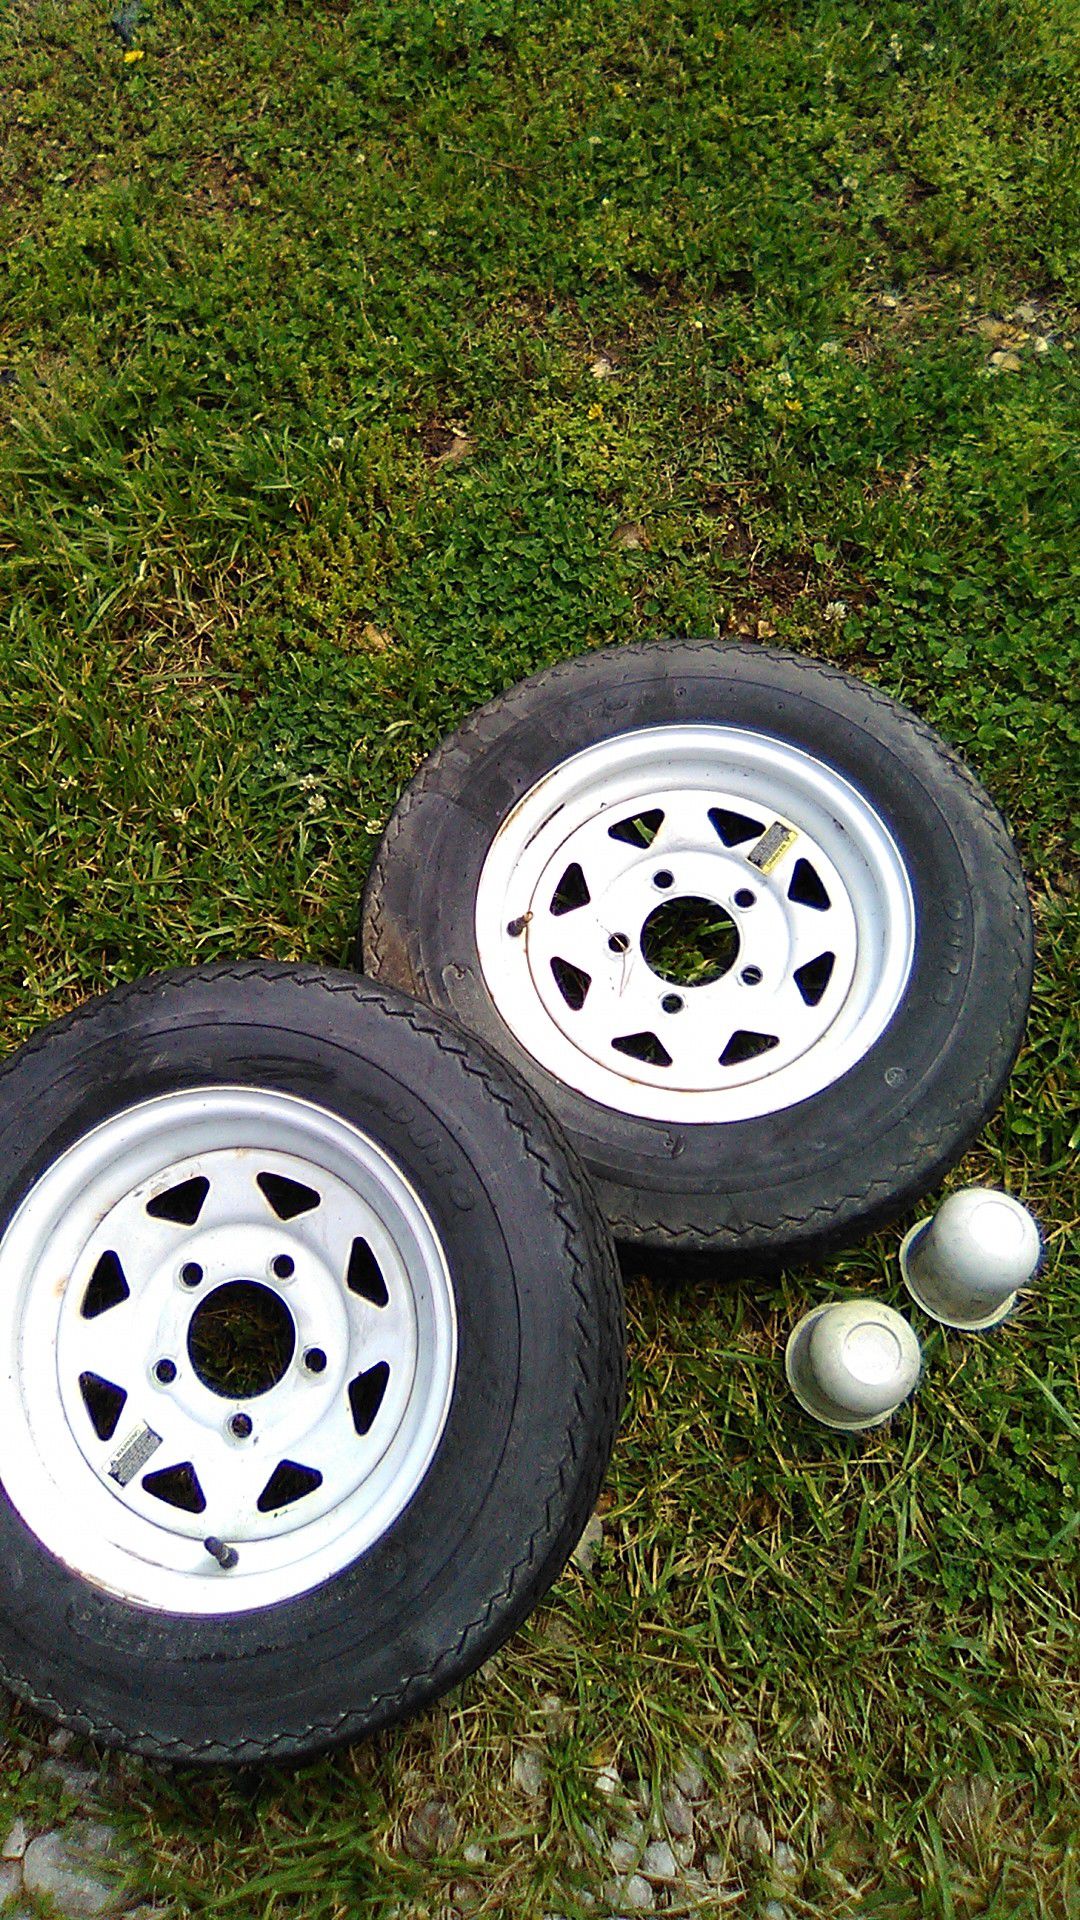 Pop-up camper tires and wheels